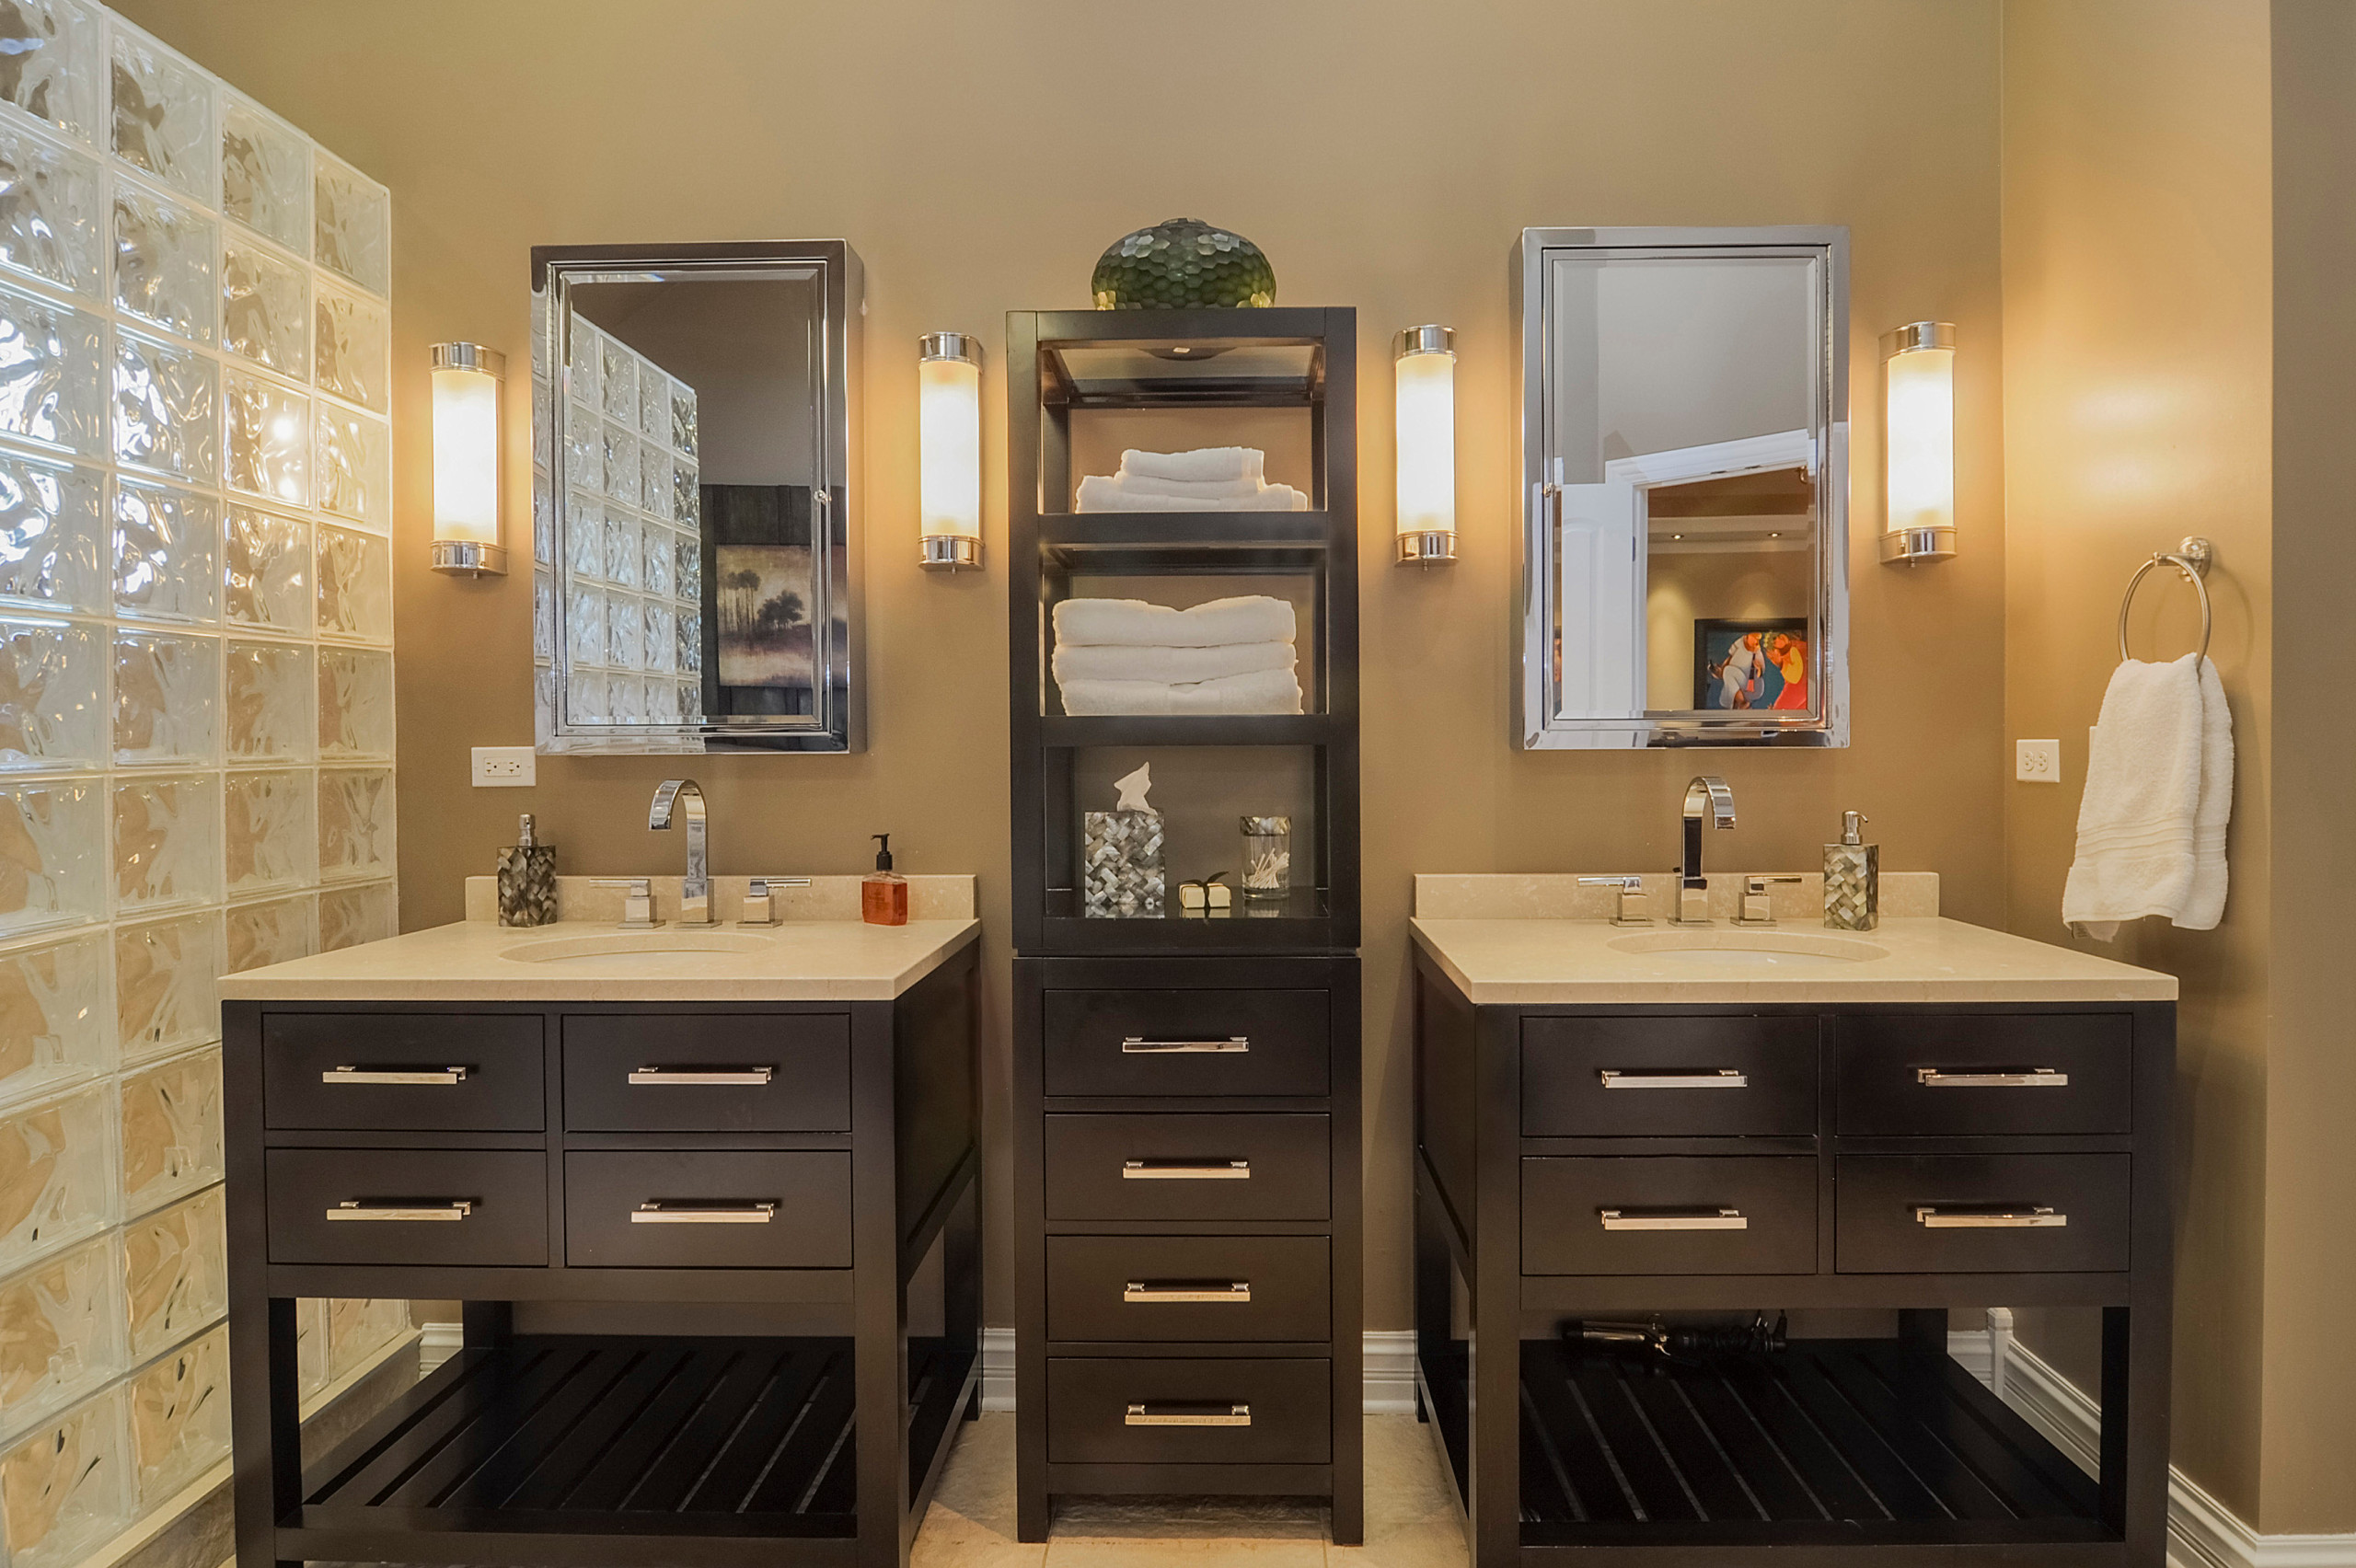 Double Vanity Linen Towers Houzz, Double Vanity With Storage Tower In The Middle